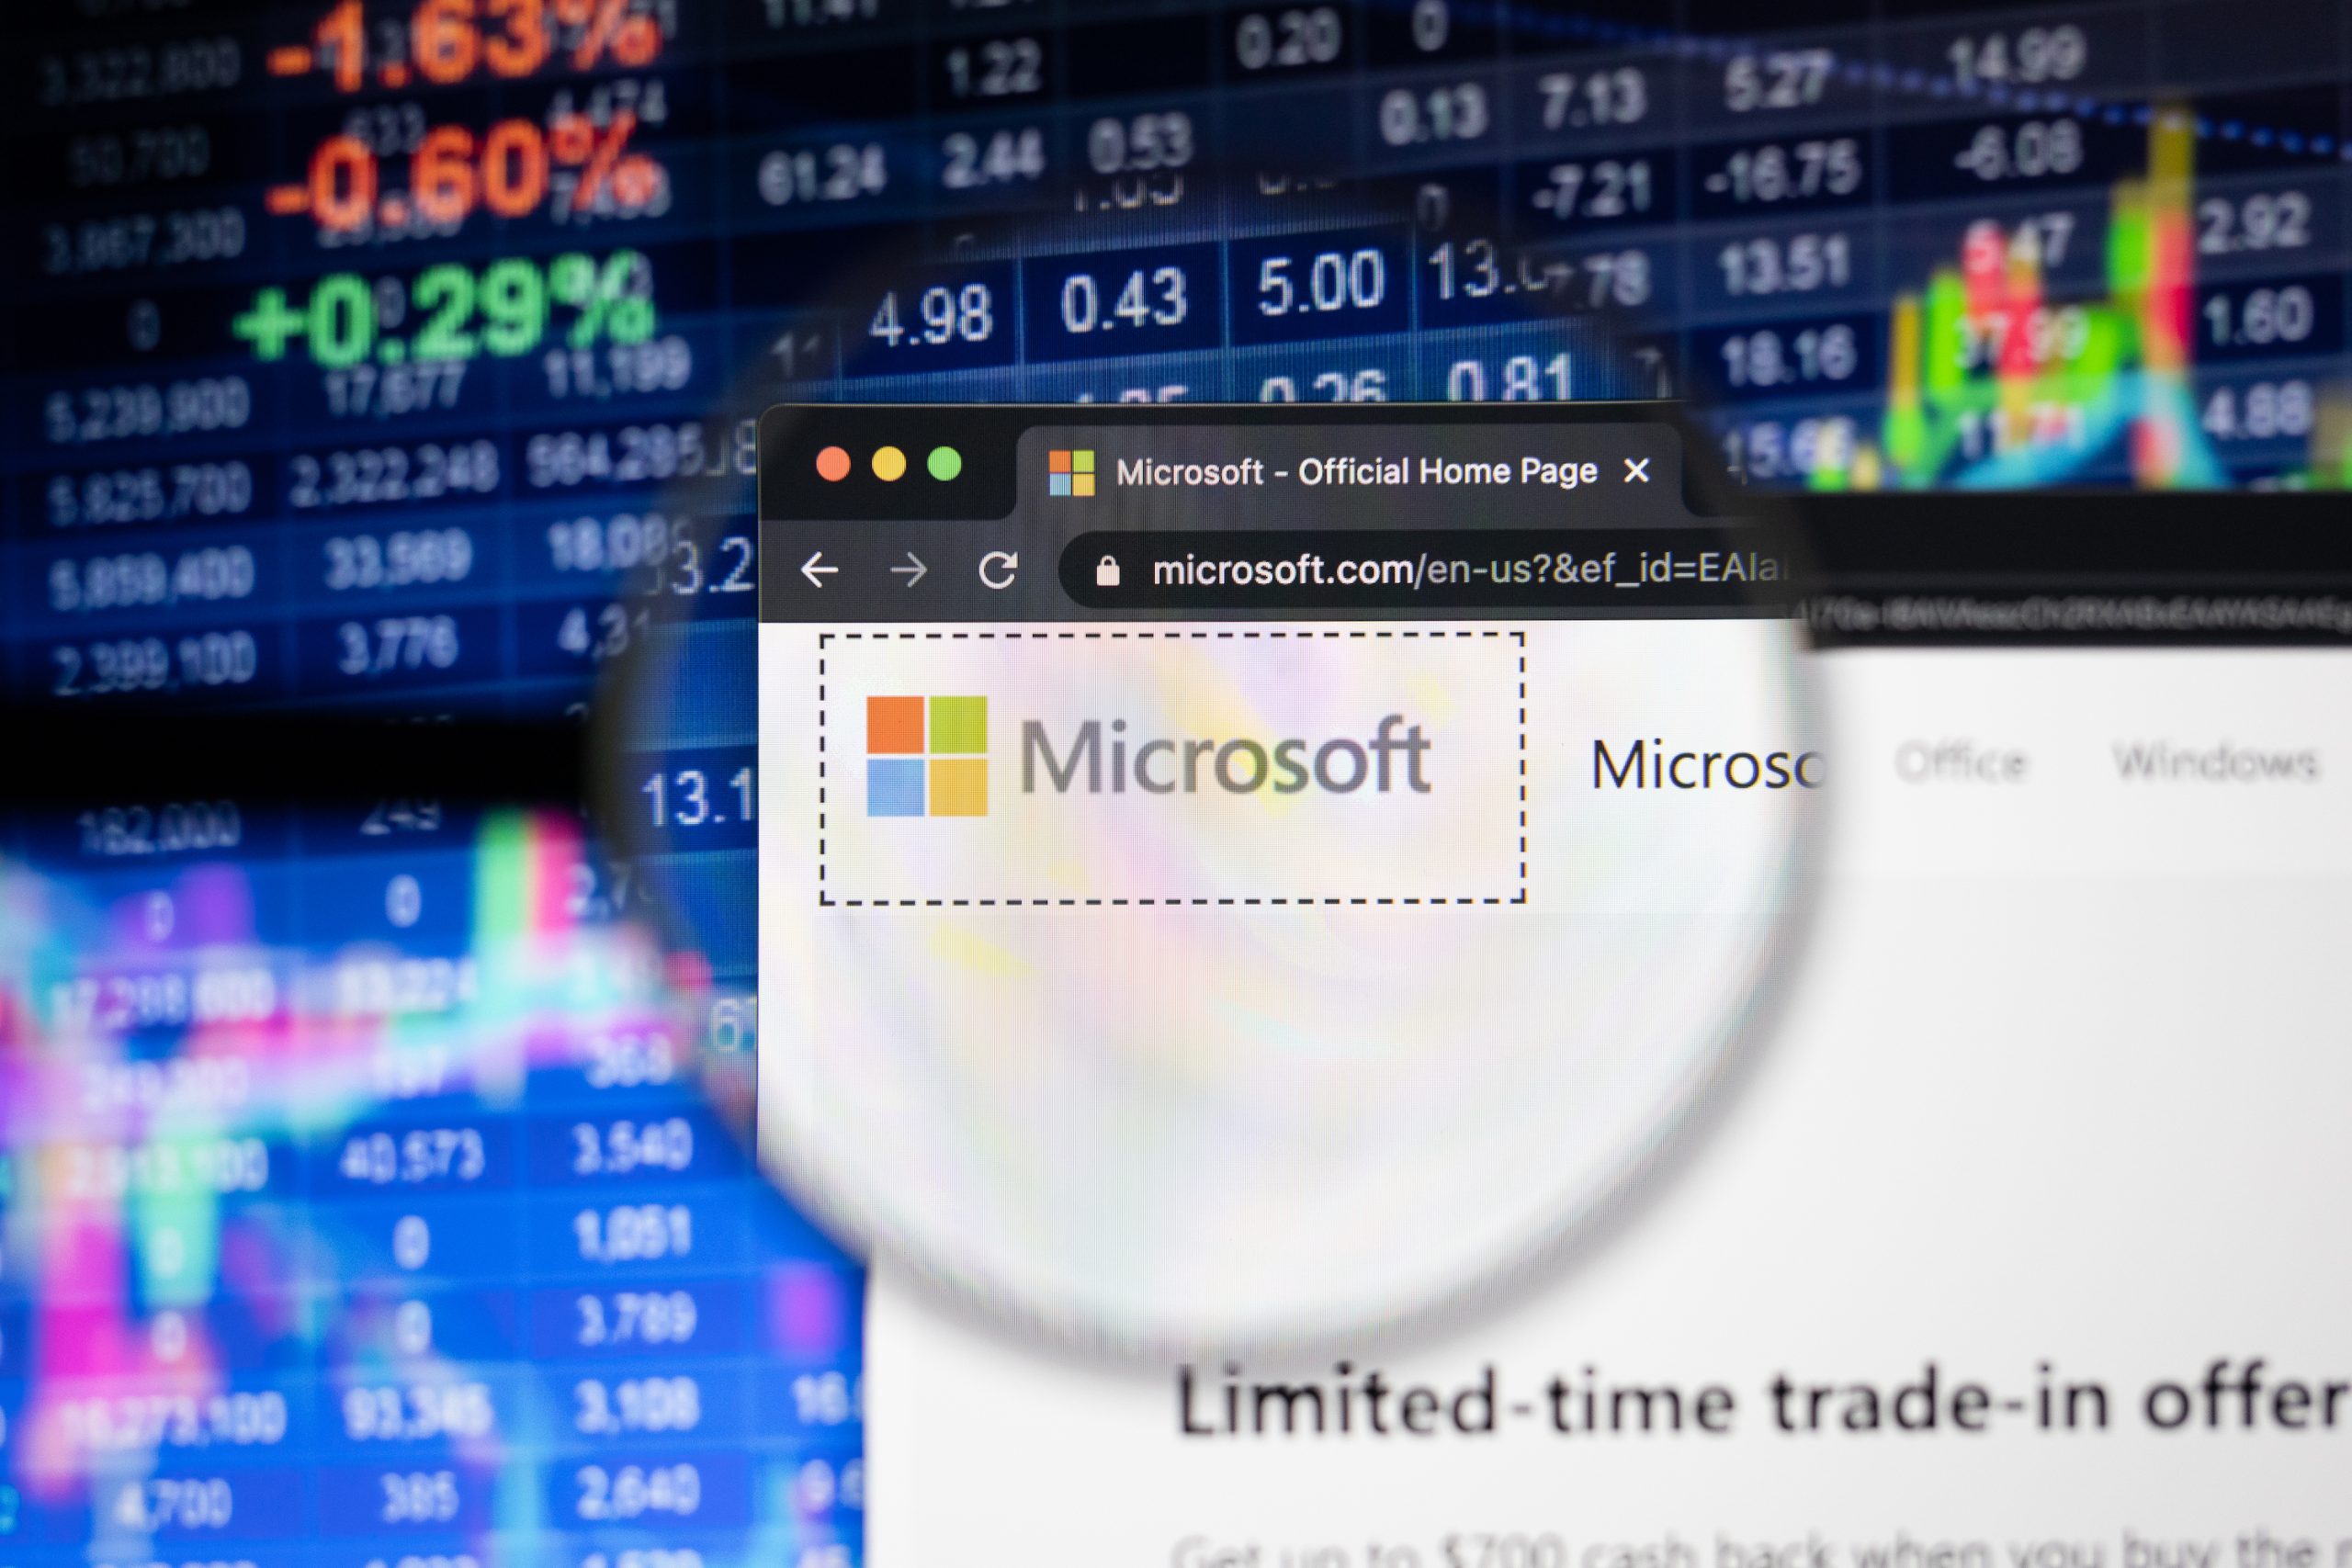 Microsoft Earnings Call Highlights Latest In AI For Search And Ads